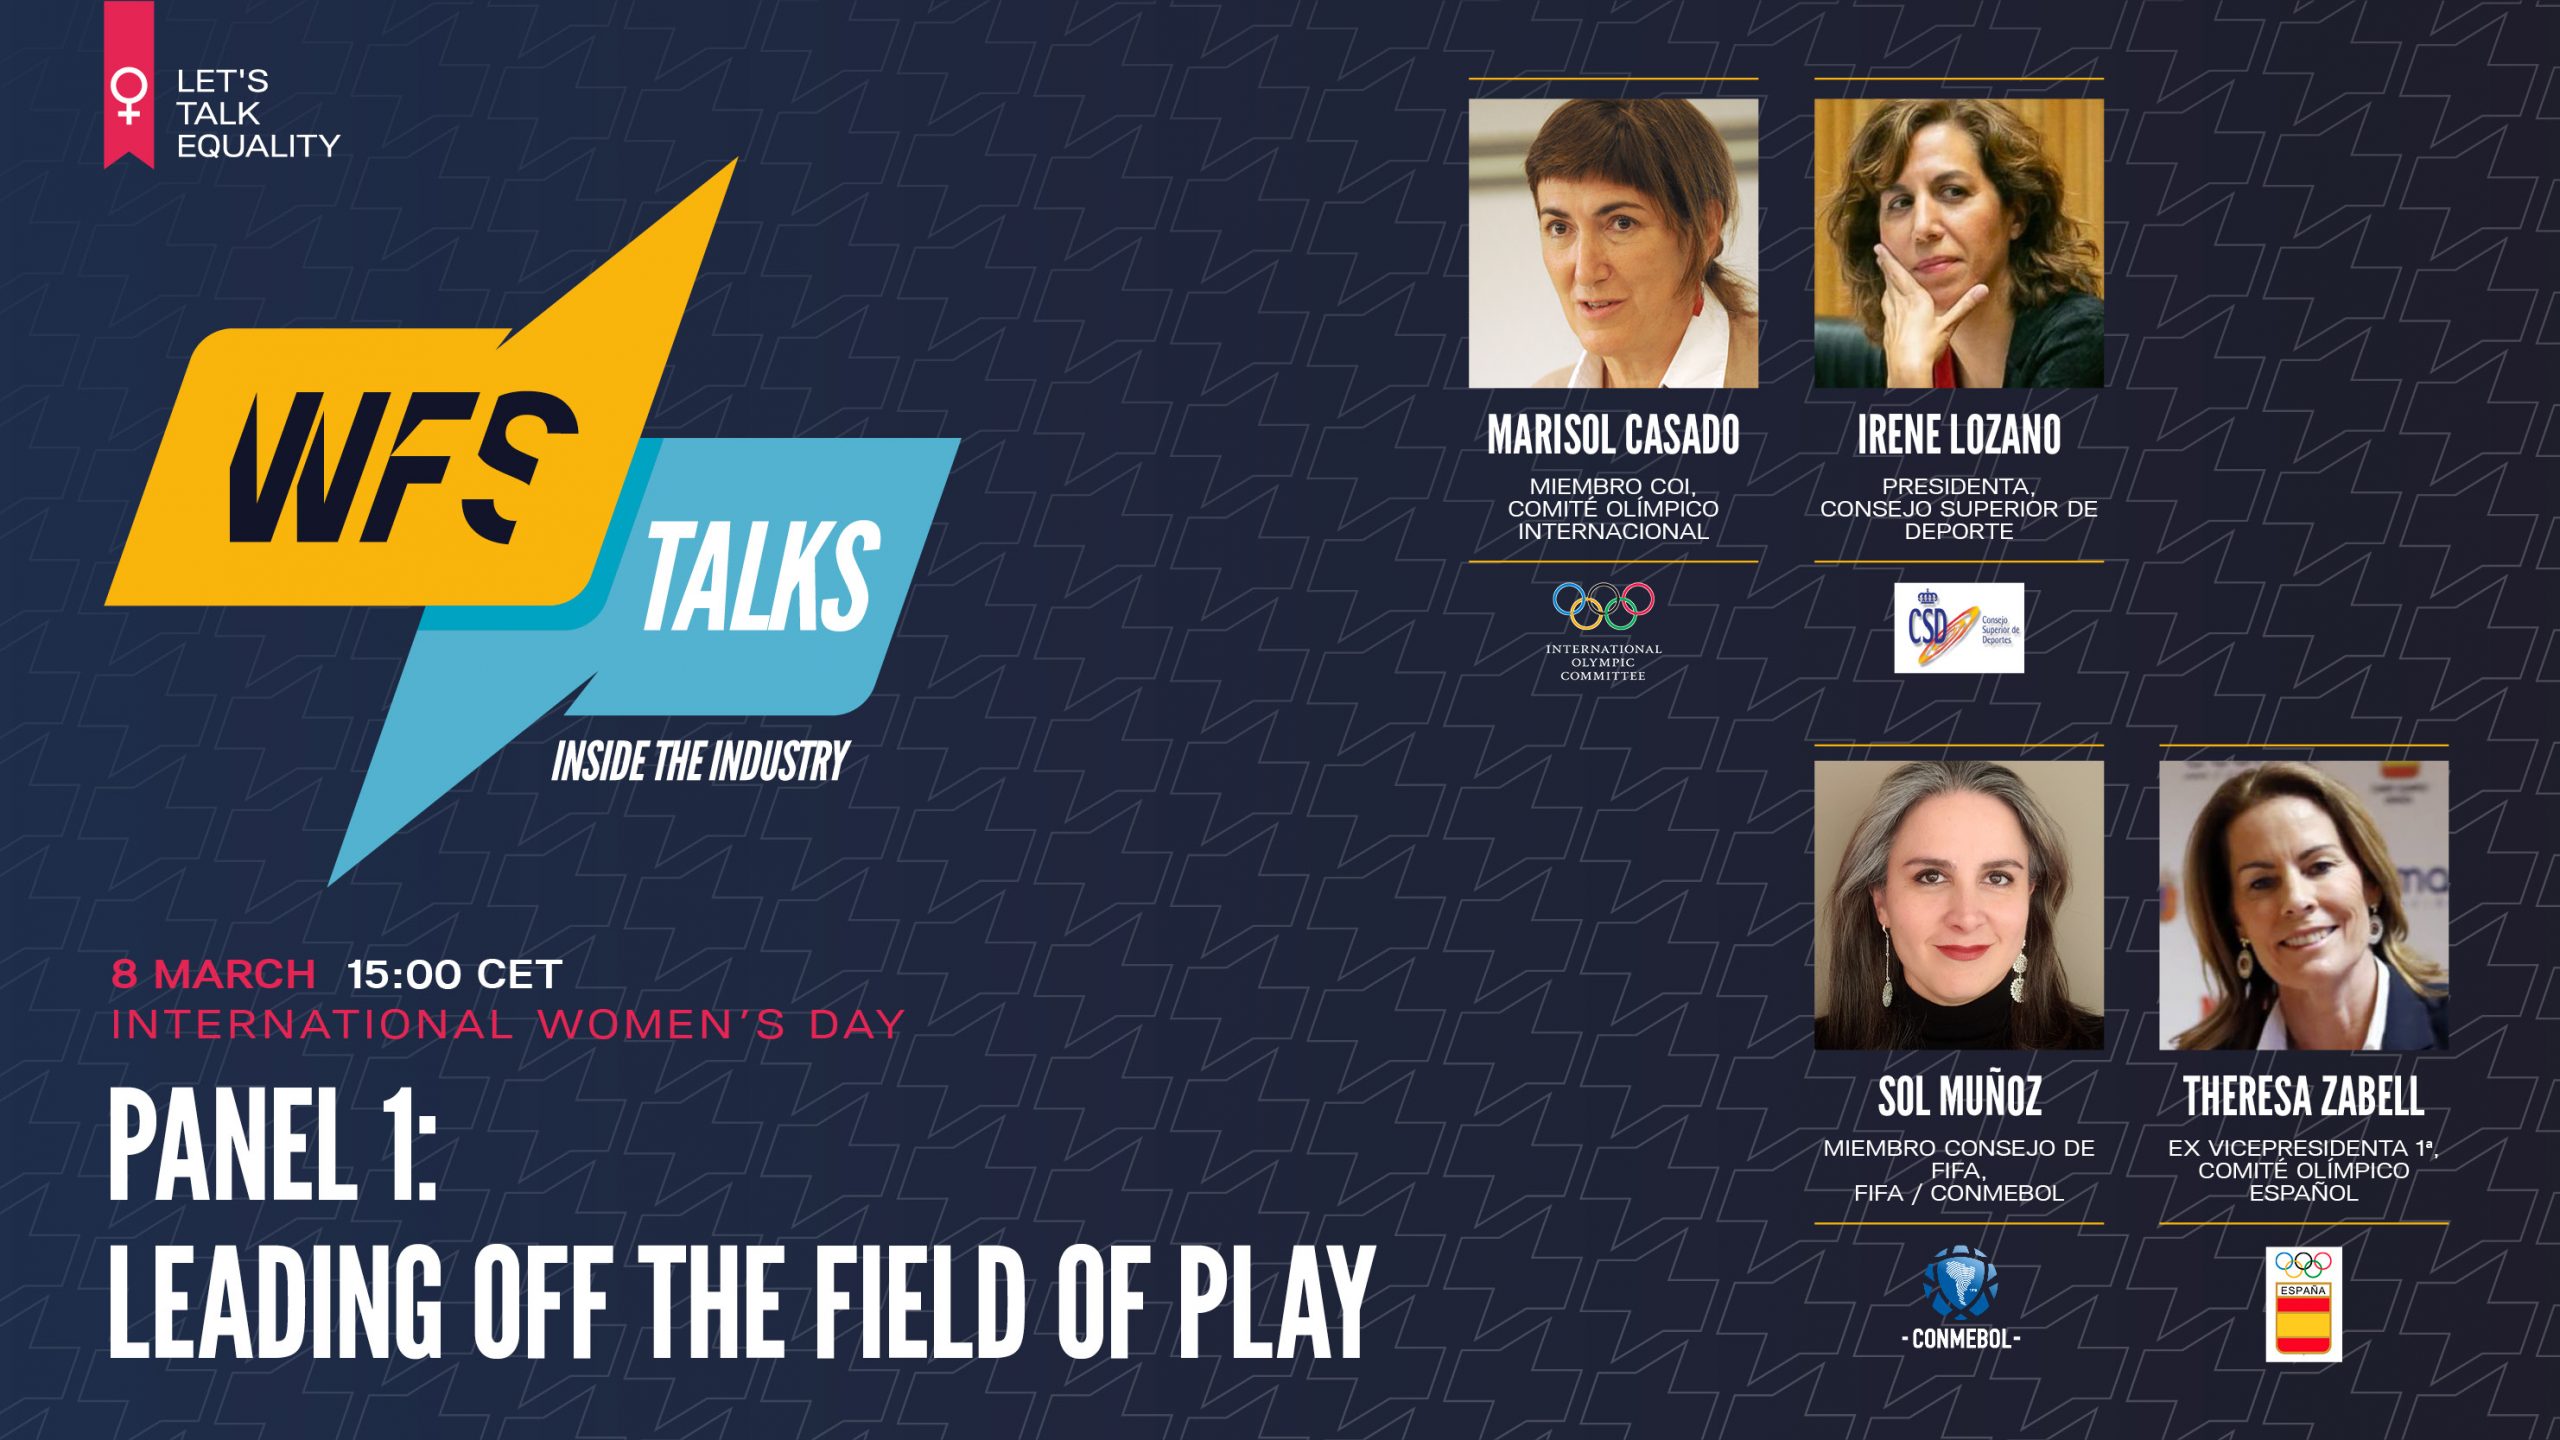 Industry leaders will share their visions on equality over the course of the series.